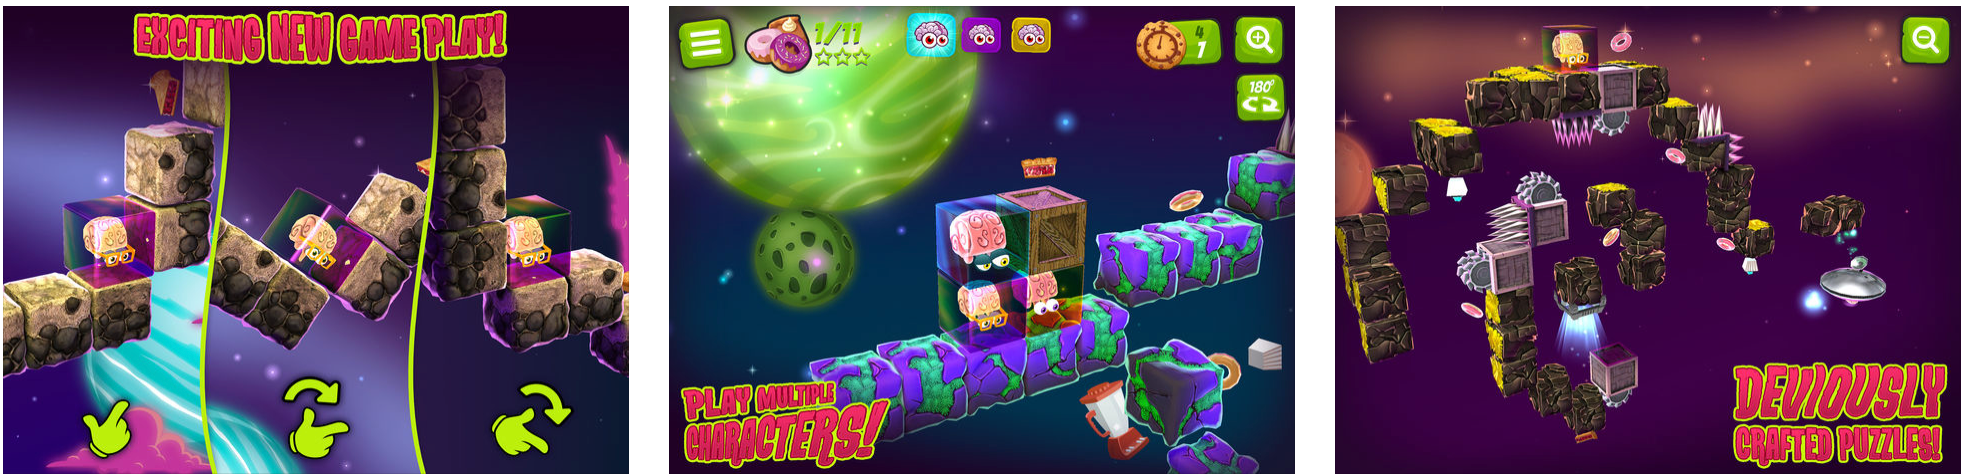 App Store Deals of the Day: Alien Jelly: Food For Thought, btw - maze puzzle, Asset Catalog Creator Pro and more!